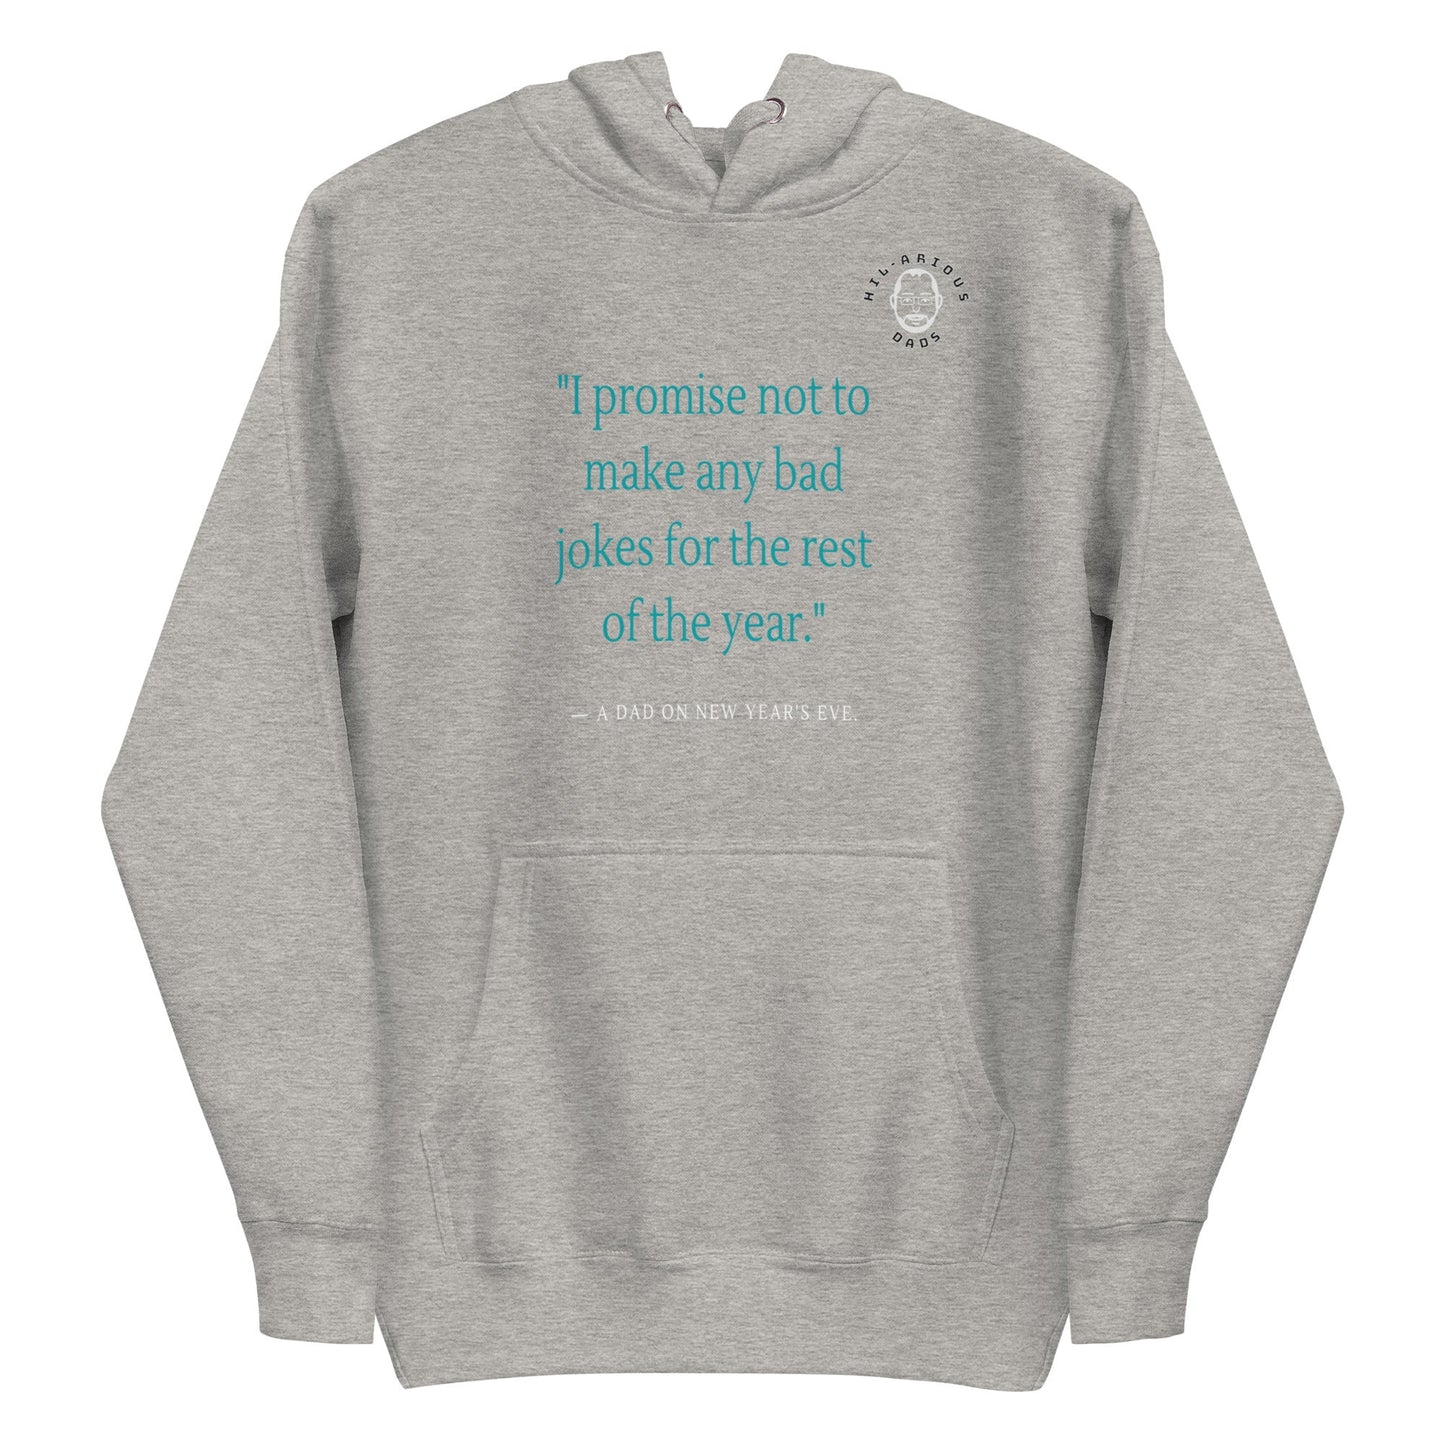 A dad's promise on New Year's Eve-Hoodie - Hil-arious Dads